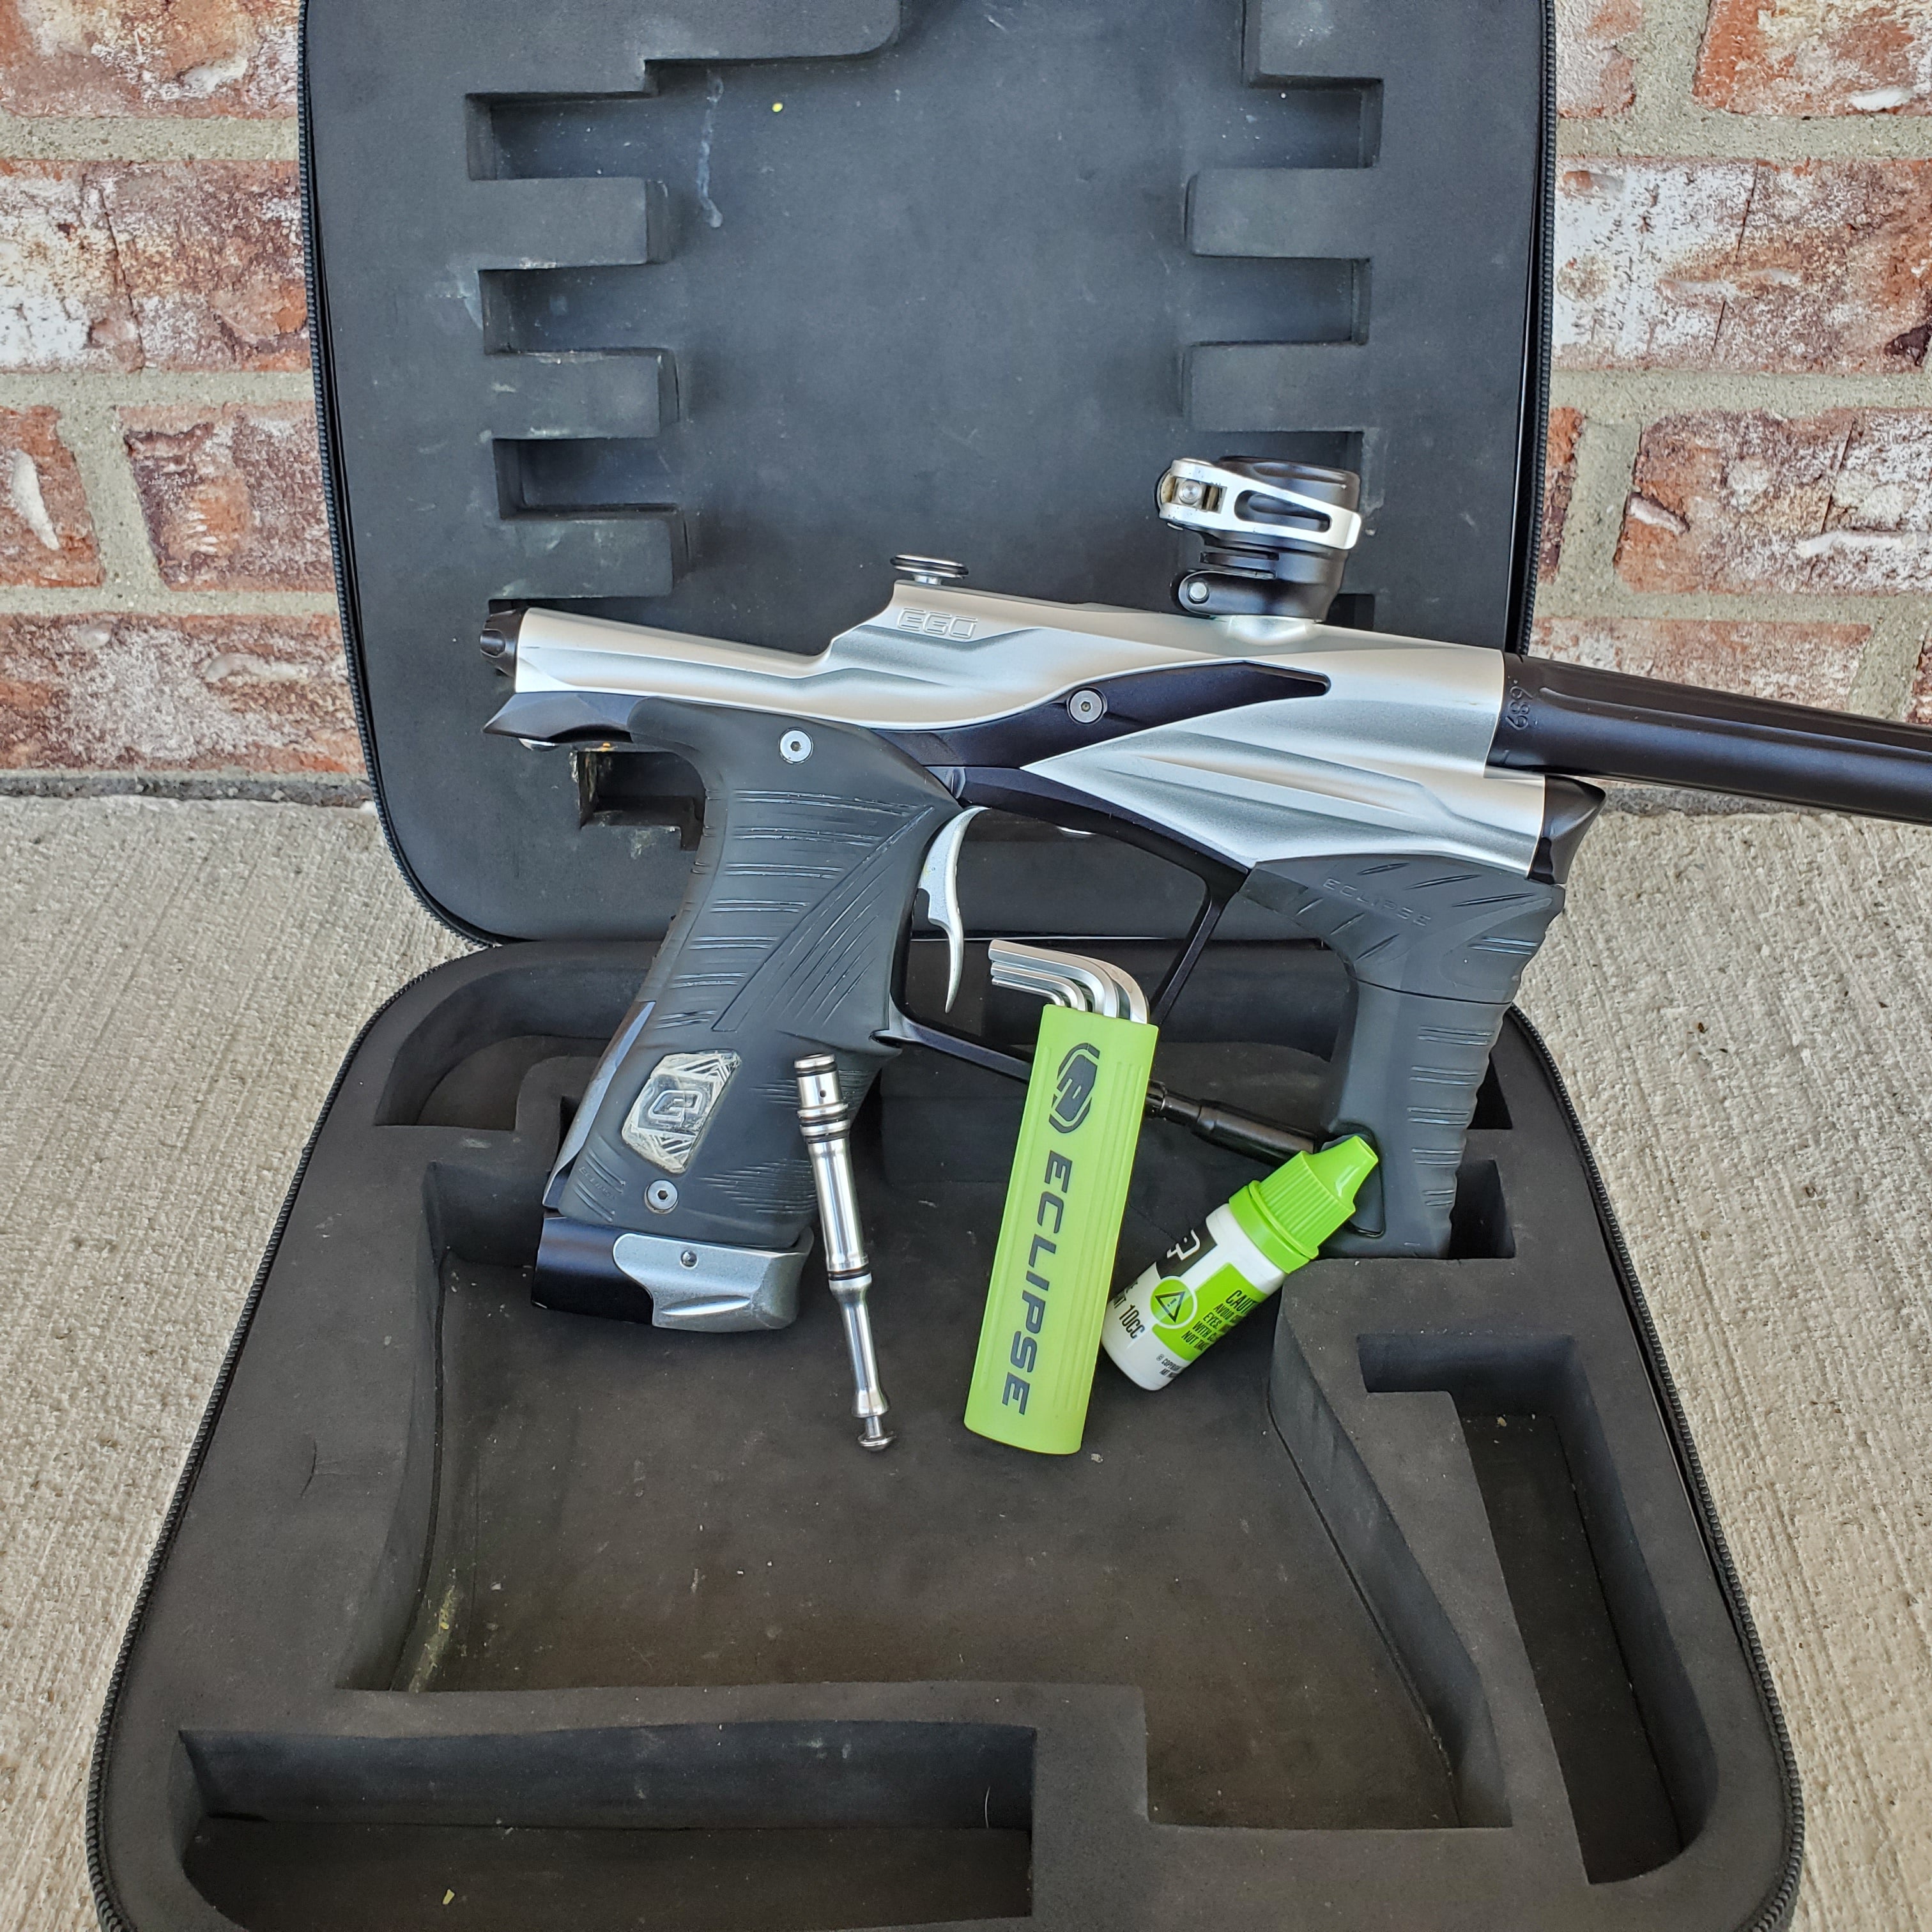 Planet Eclipse Ego LV1.5 Paintball Gun - Review 